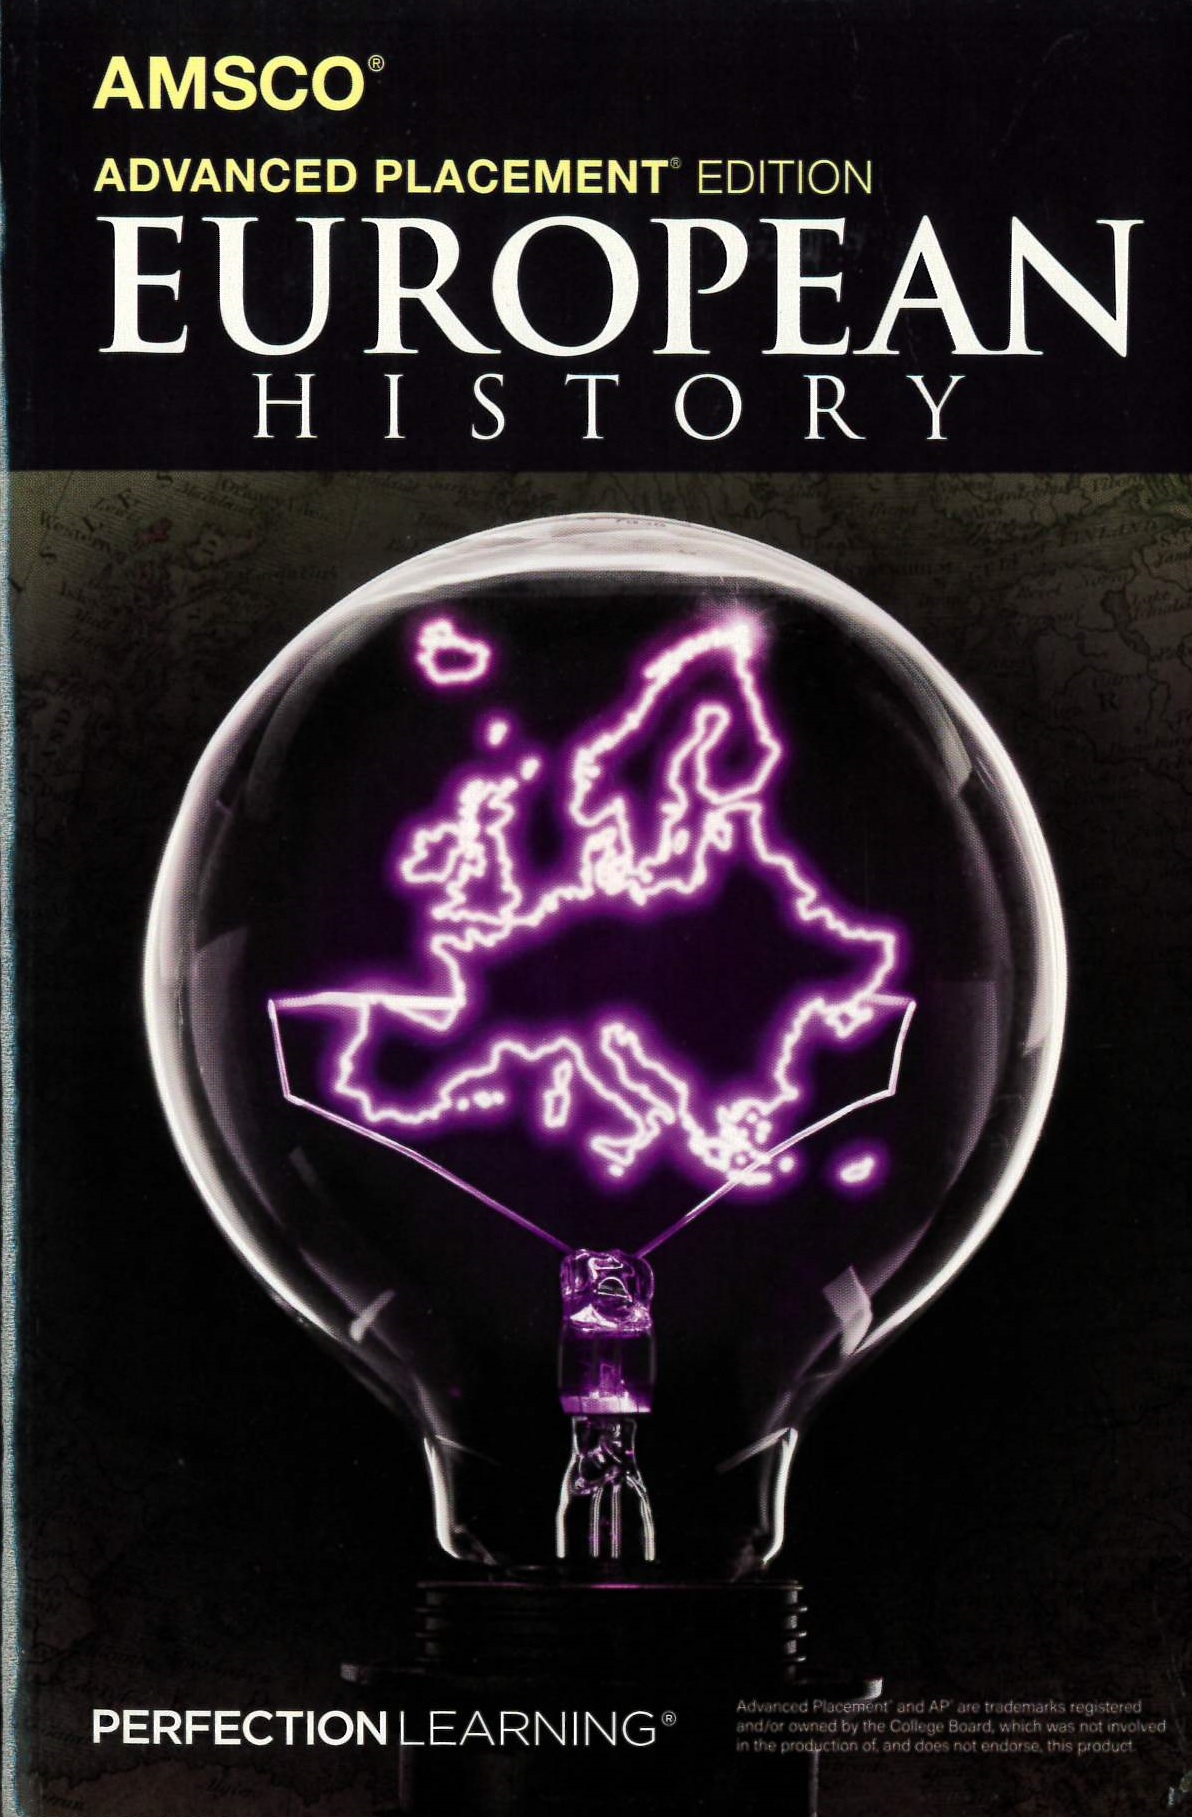 Advanced placement European history